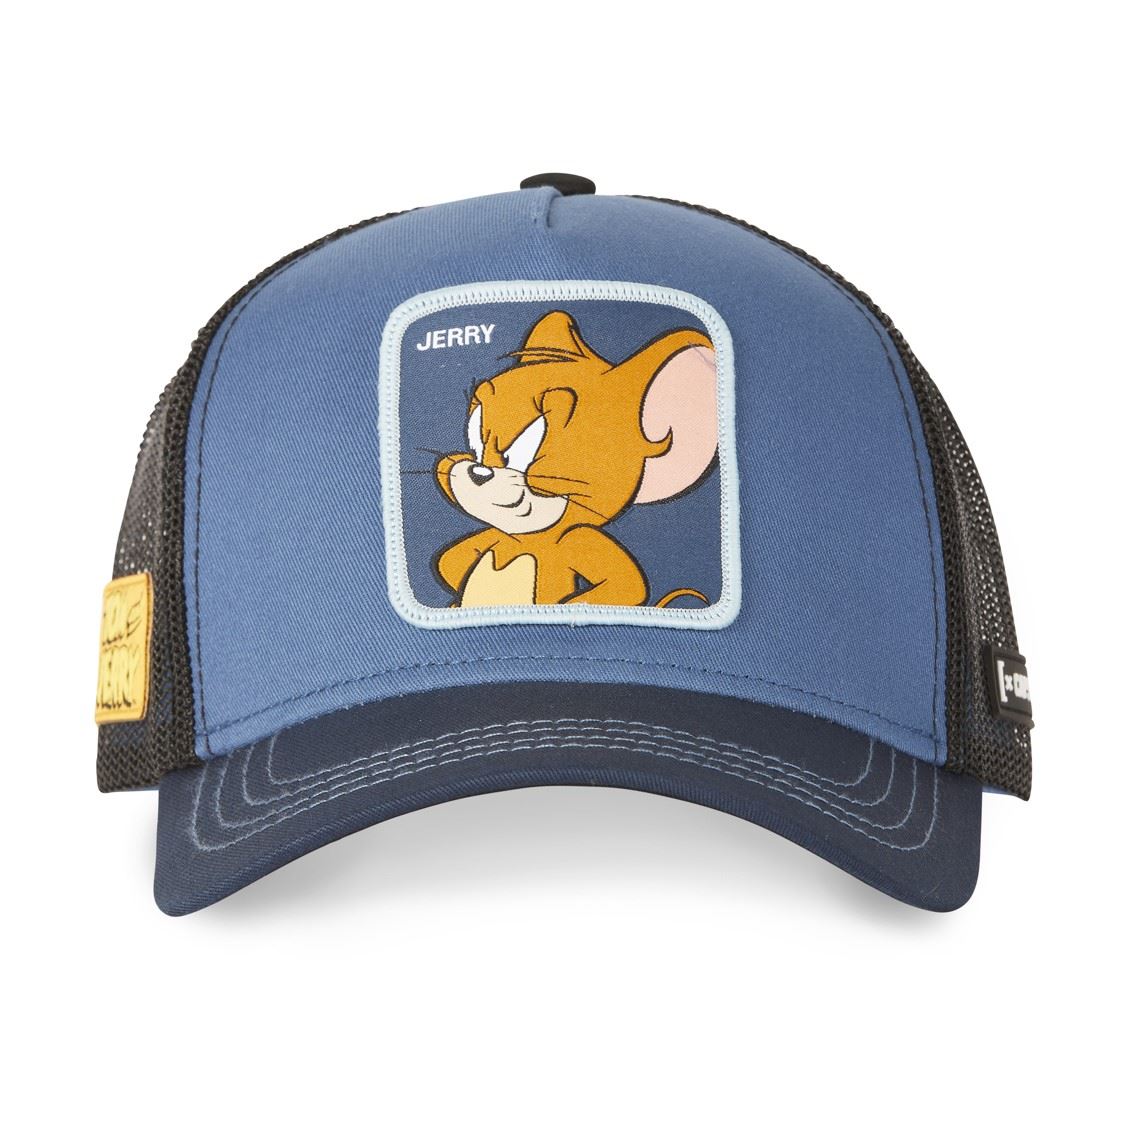 Jerry Blue Tom and Jerry Trucker Cap Capslab